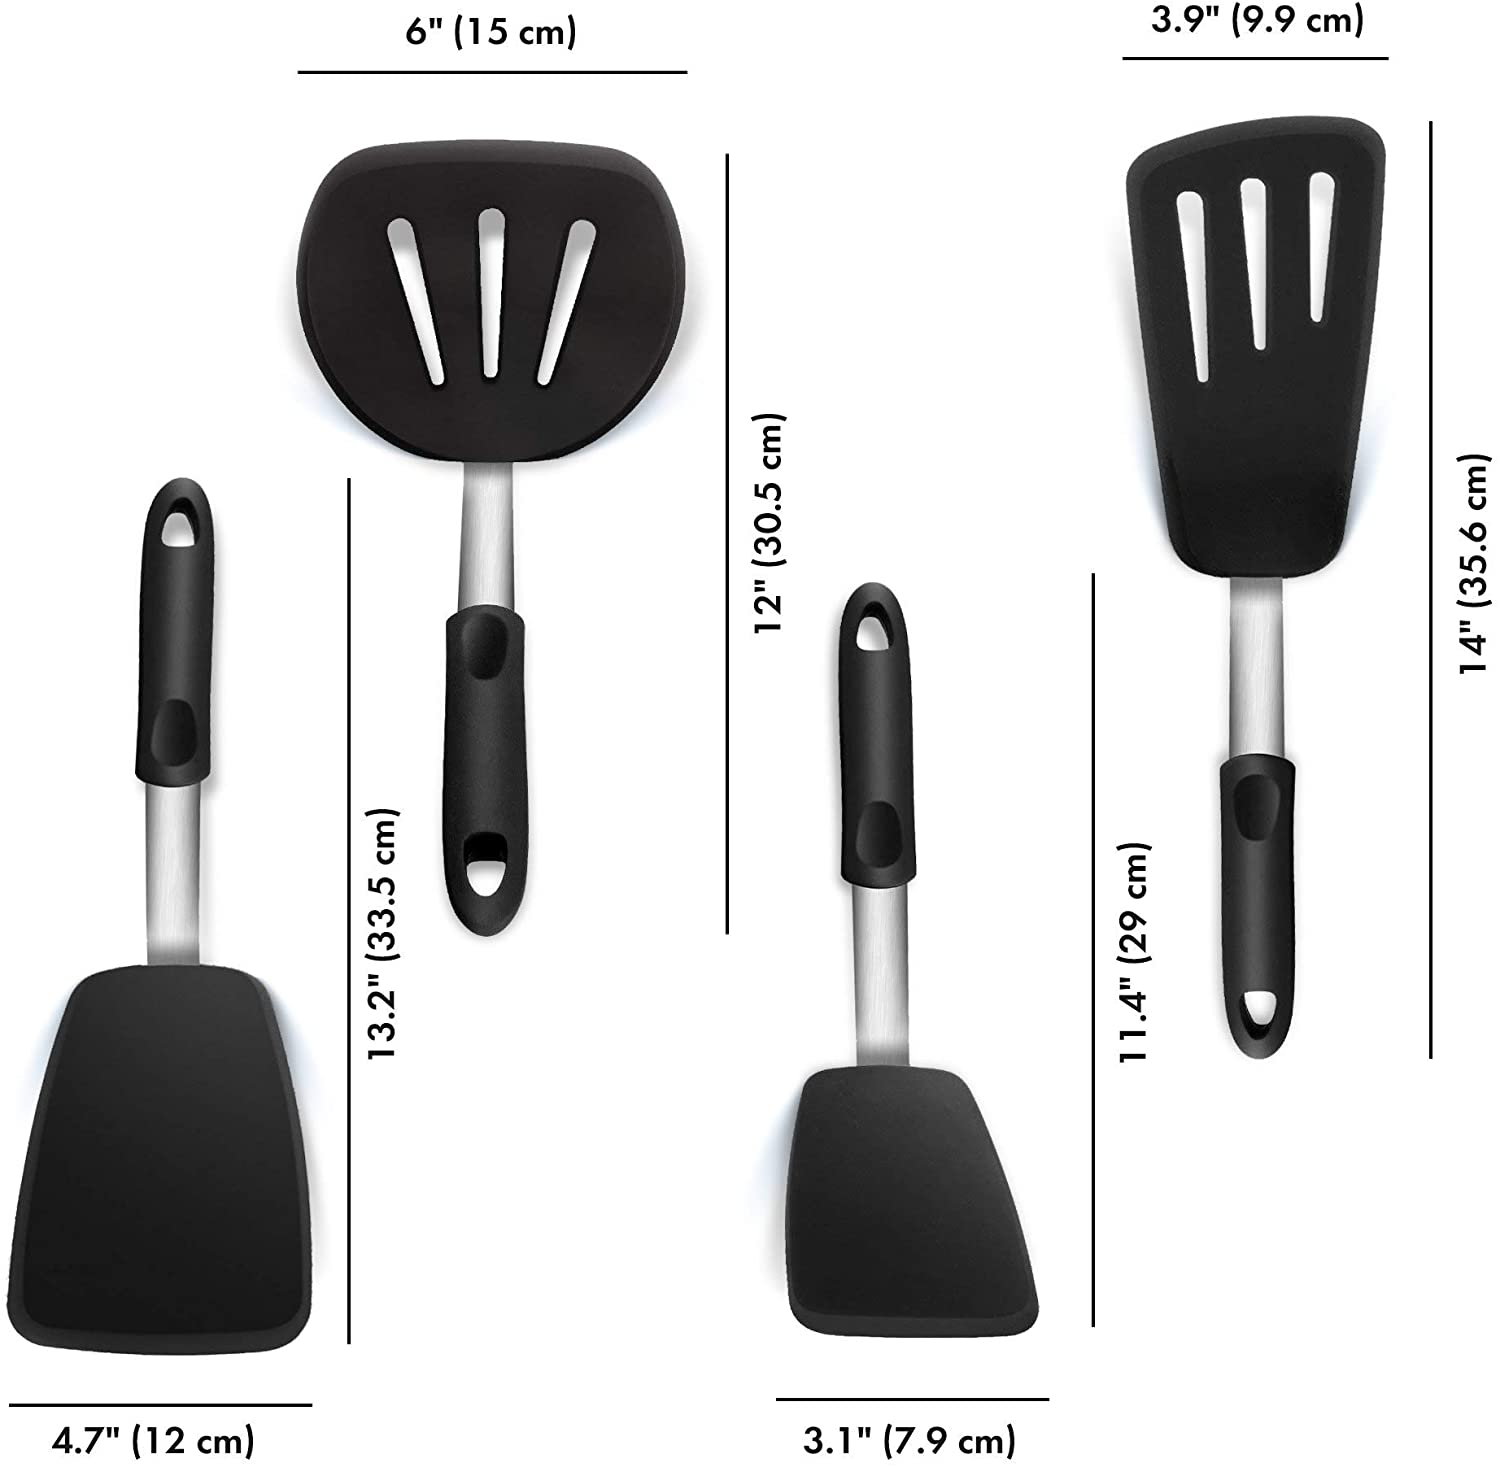 Kitchen Spatula Silicone Utensils Set of 6 Heat Resistant Rubber for Baking  Cook